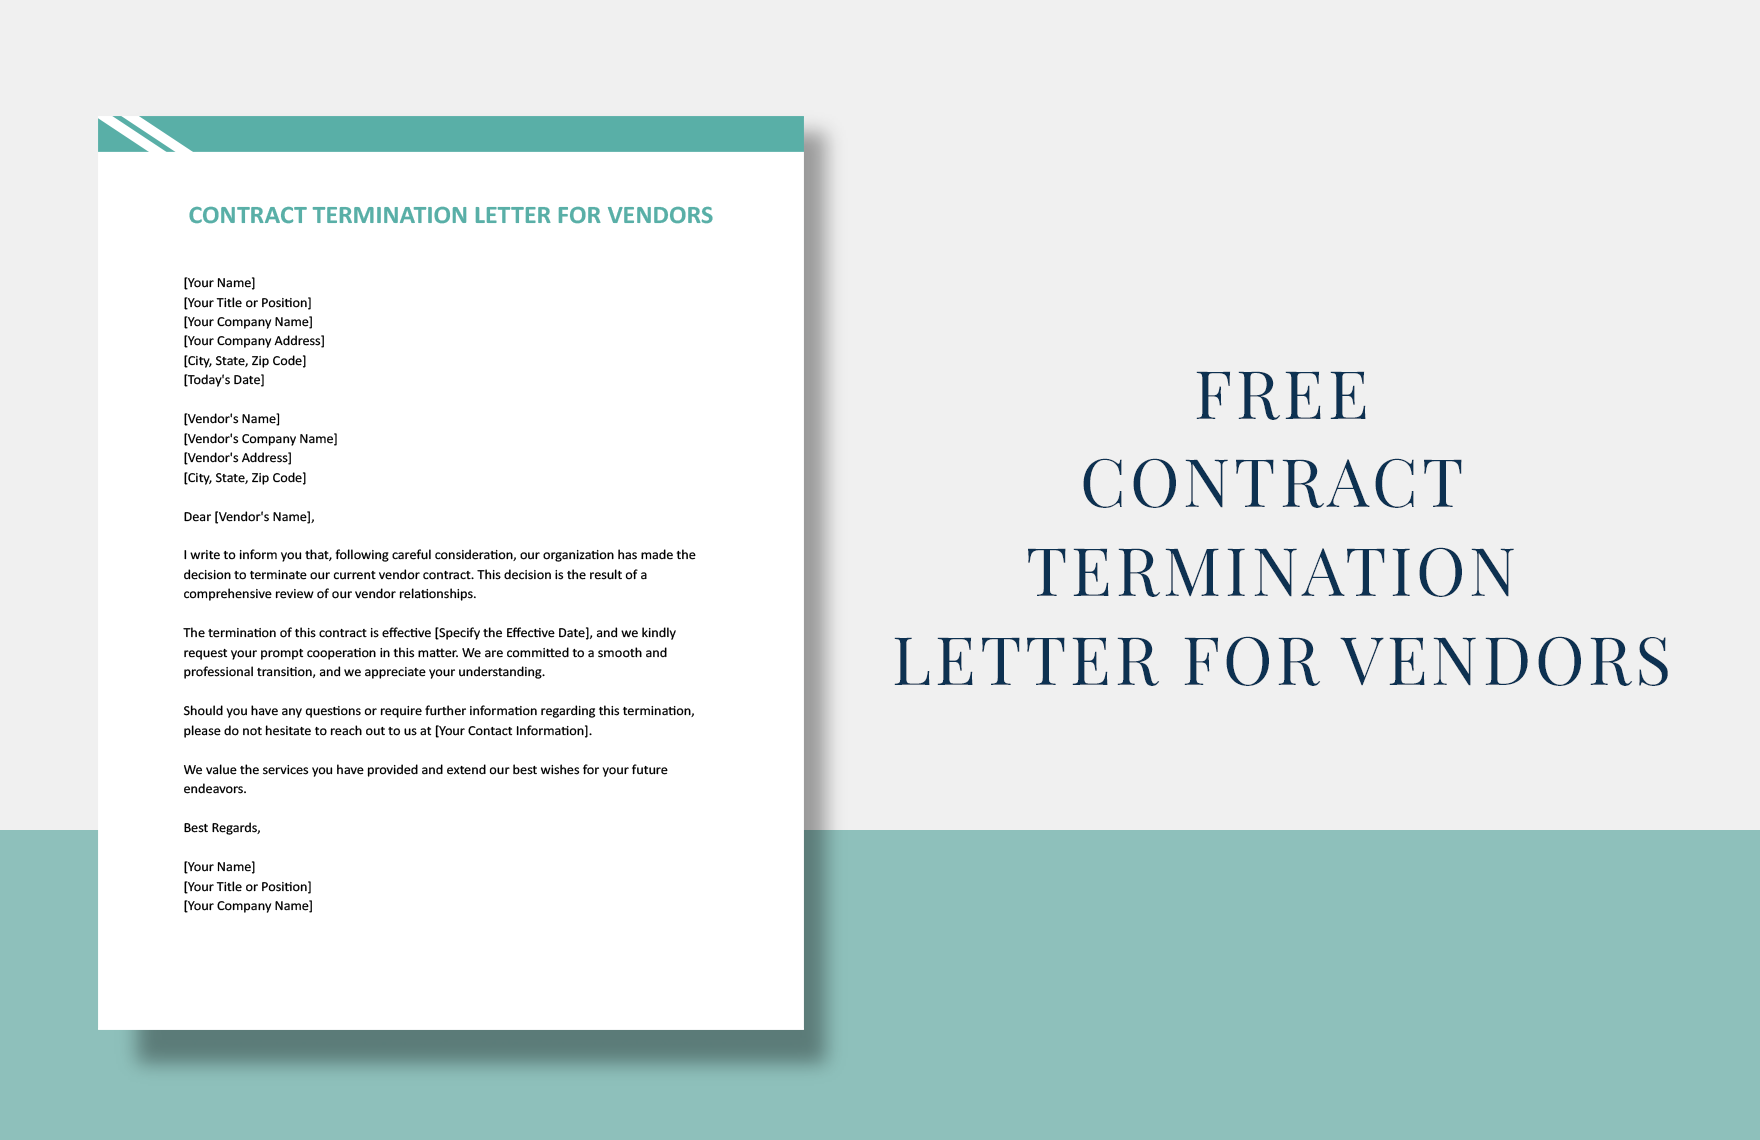 Contract Termination Letter For Vendors in Word, Google Docs